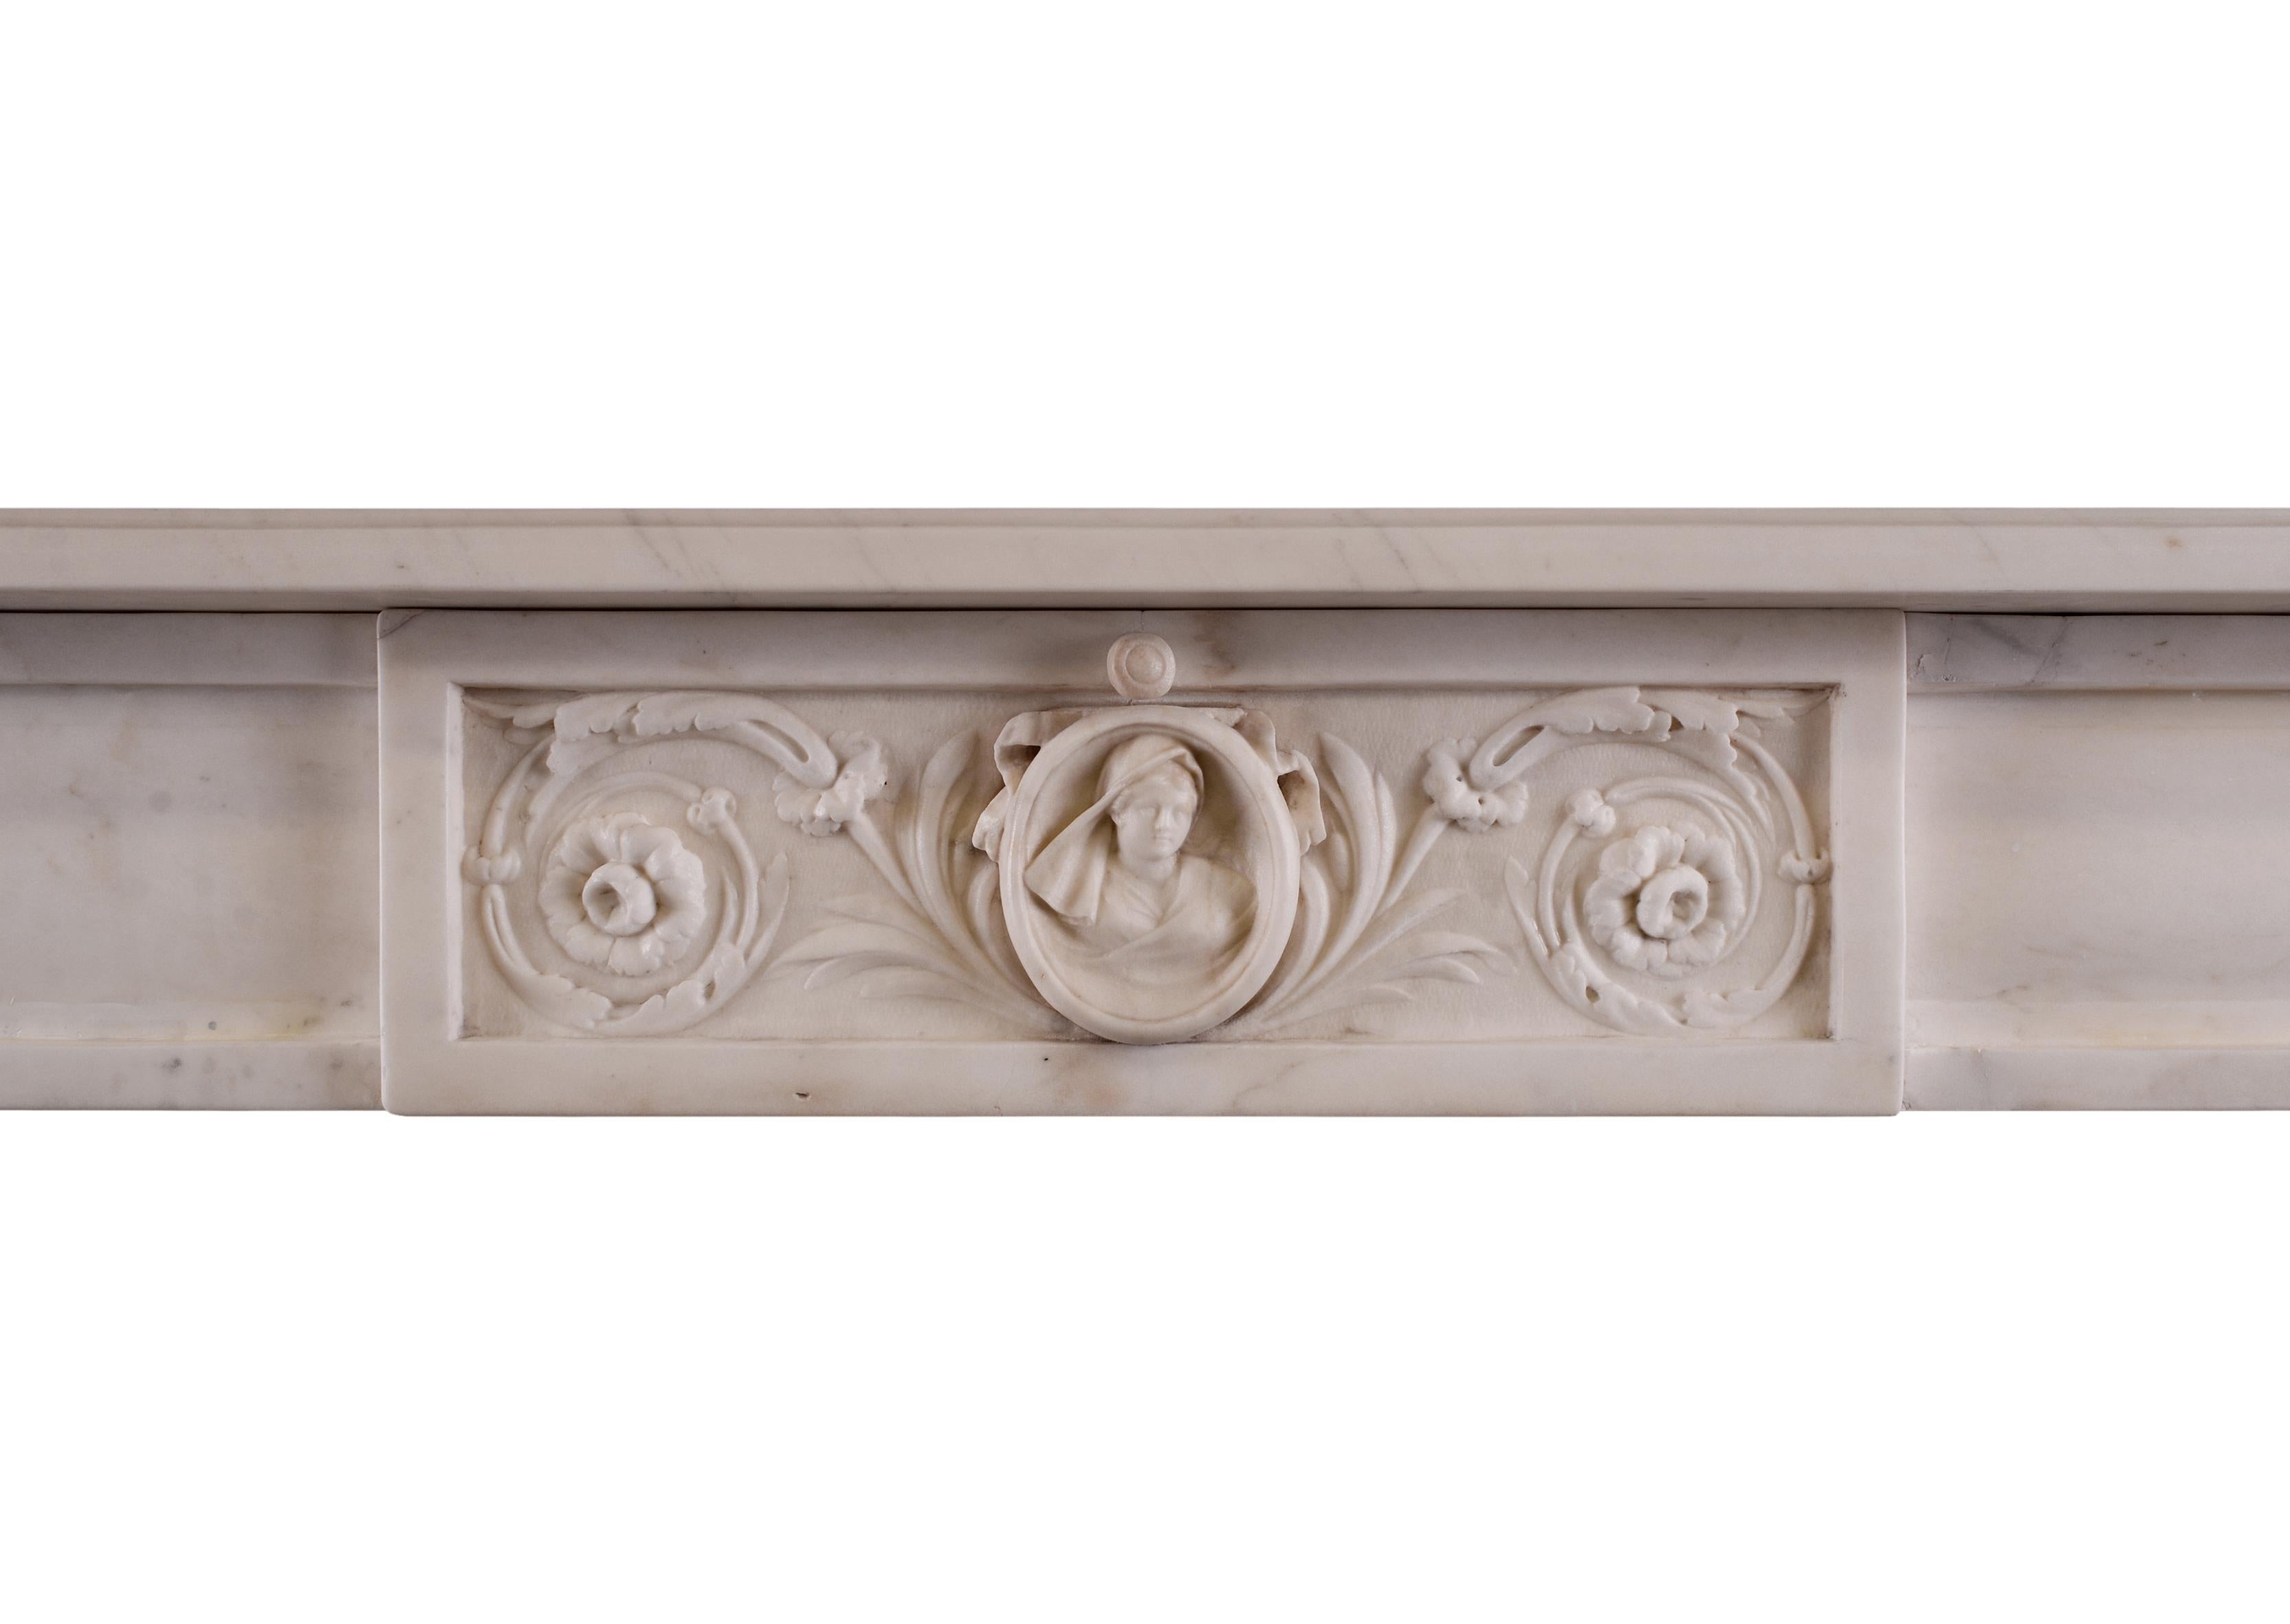 An 18th century Italian fireplace in white Statuario marble. The panelled jambs with carved cascading foliage, surmounted by finely carved rams heads to end blocks. The centre panel with paterae, foliage and female figure to central plaque. Some